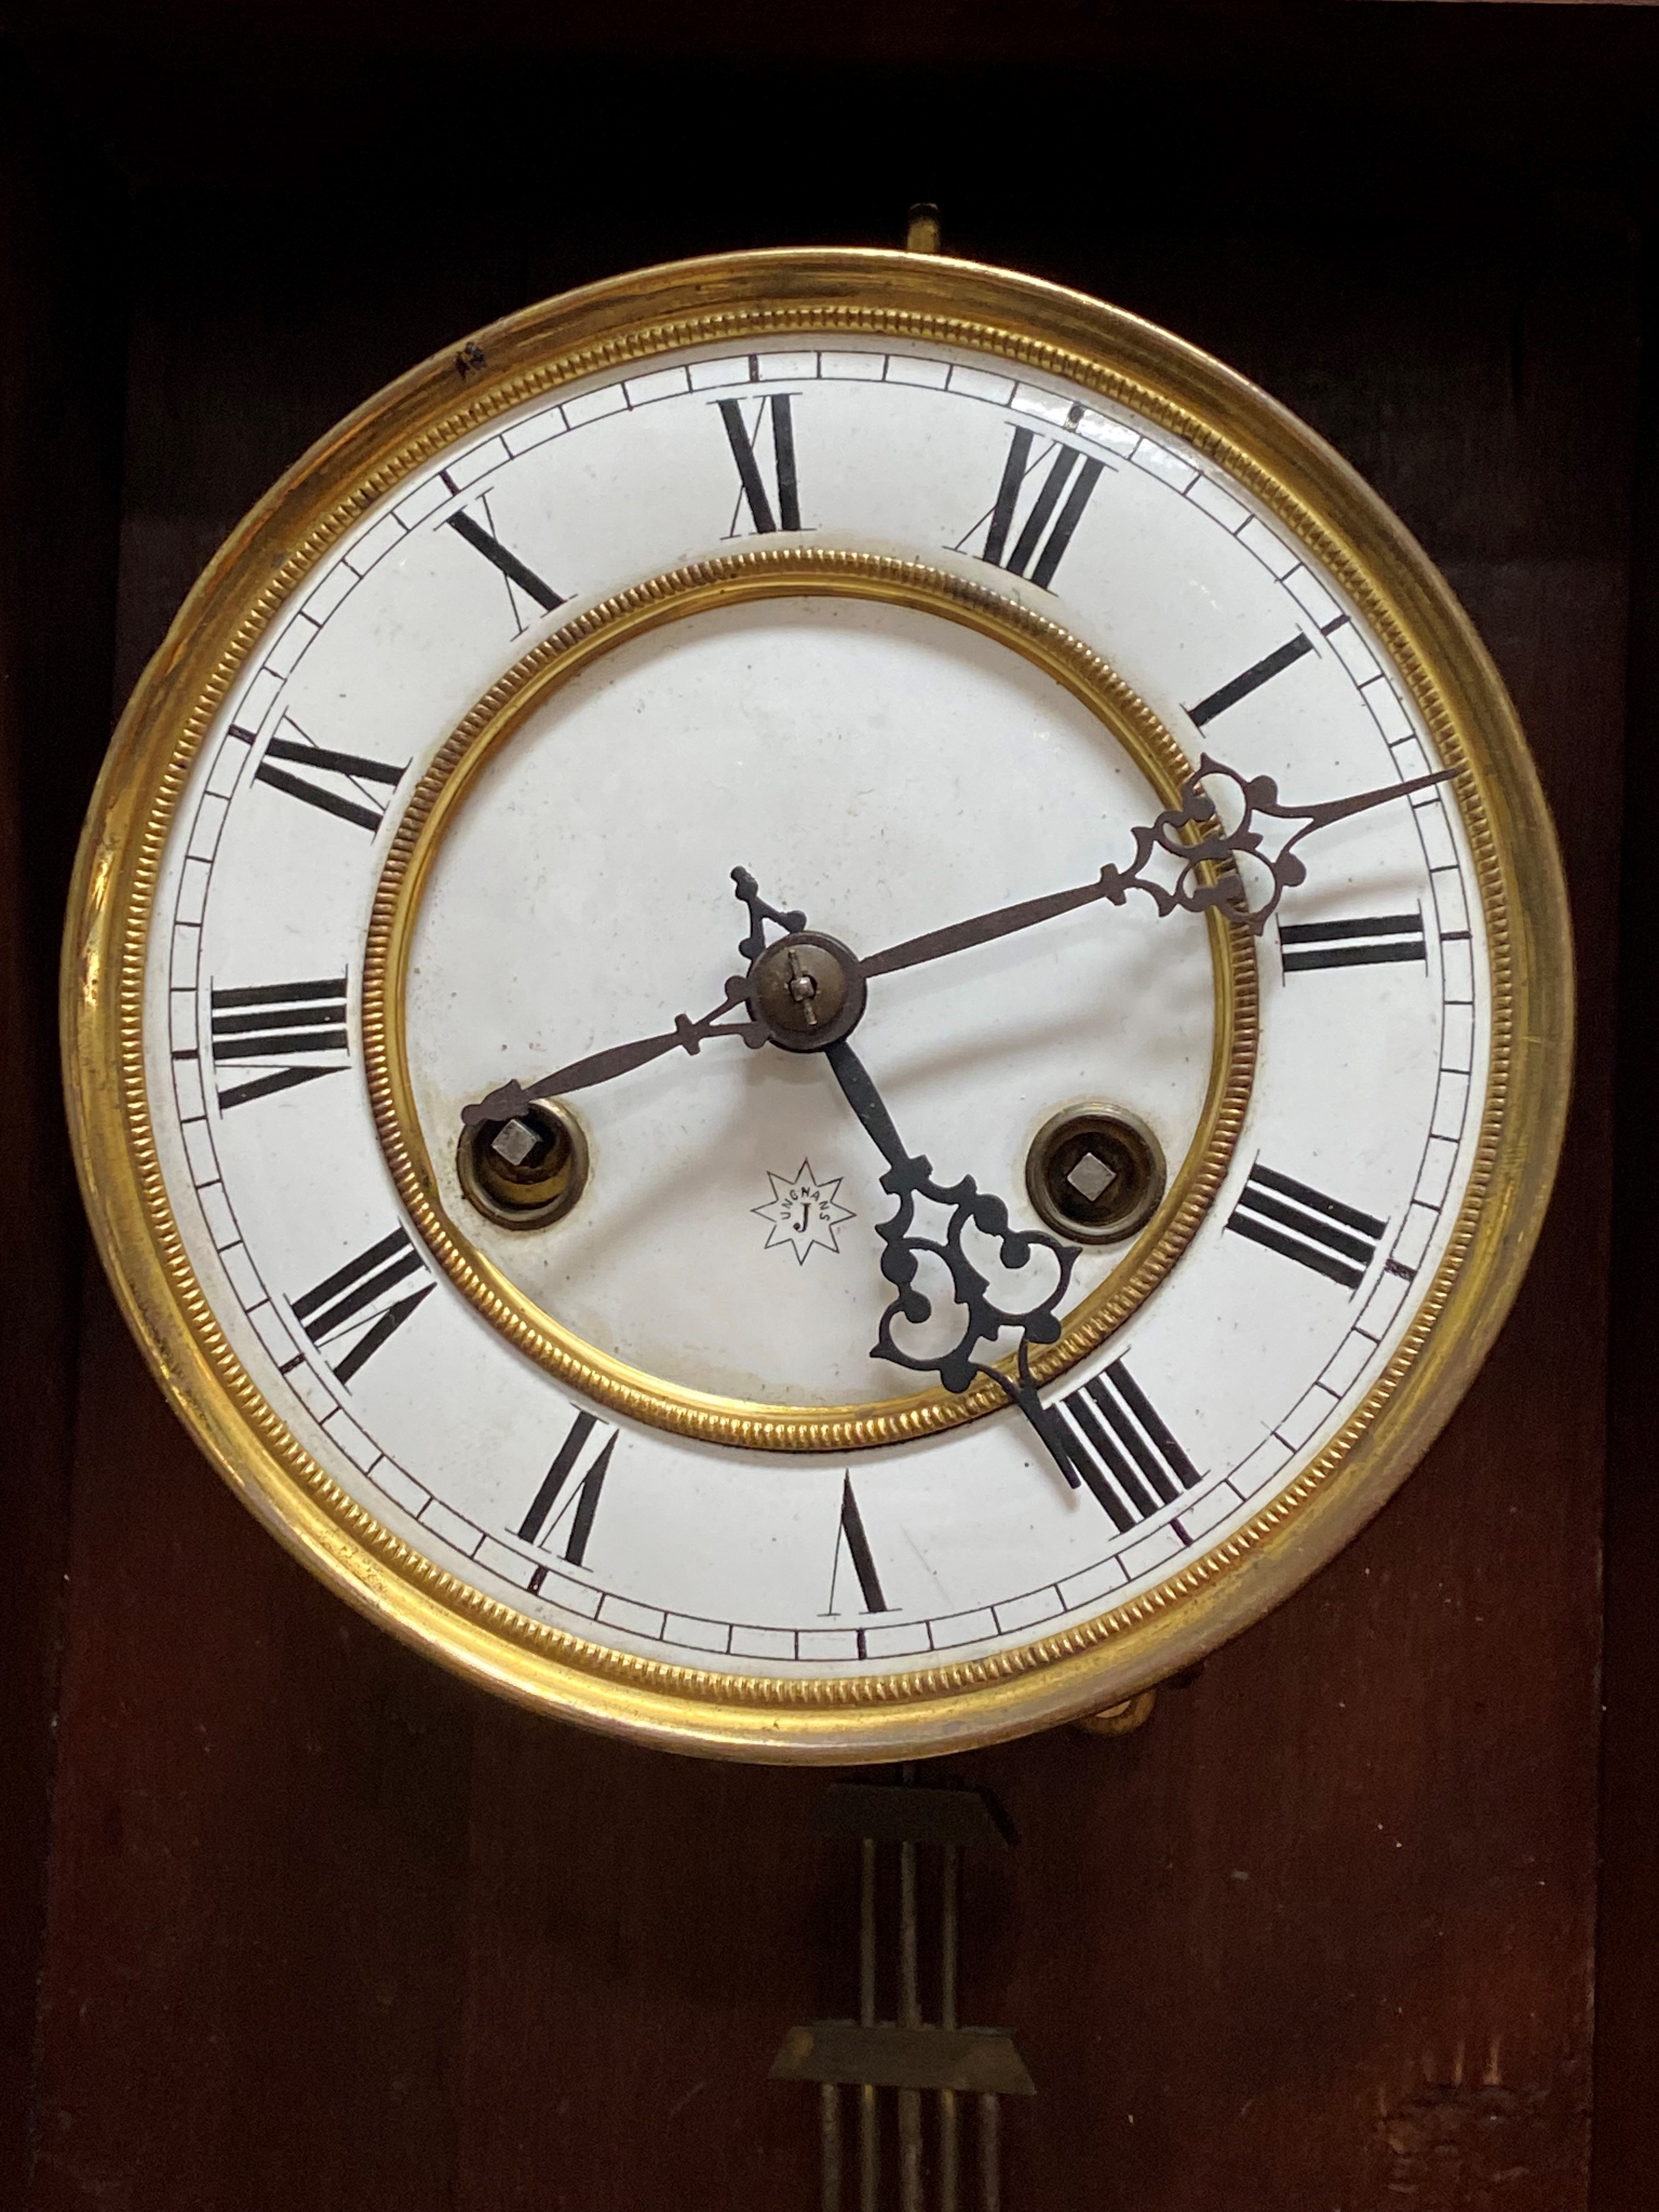 A Junghans Vienna type regulator wall clock, circa 1860's, the walnut case well-carved with an eagle - Image 2 of 3